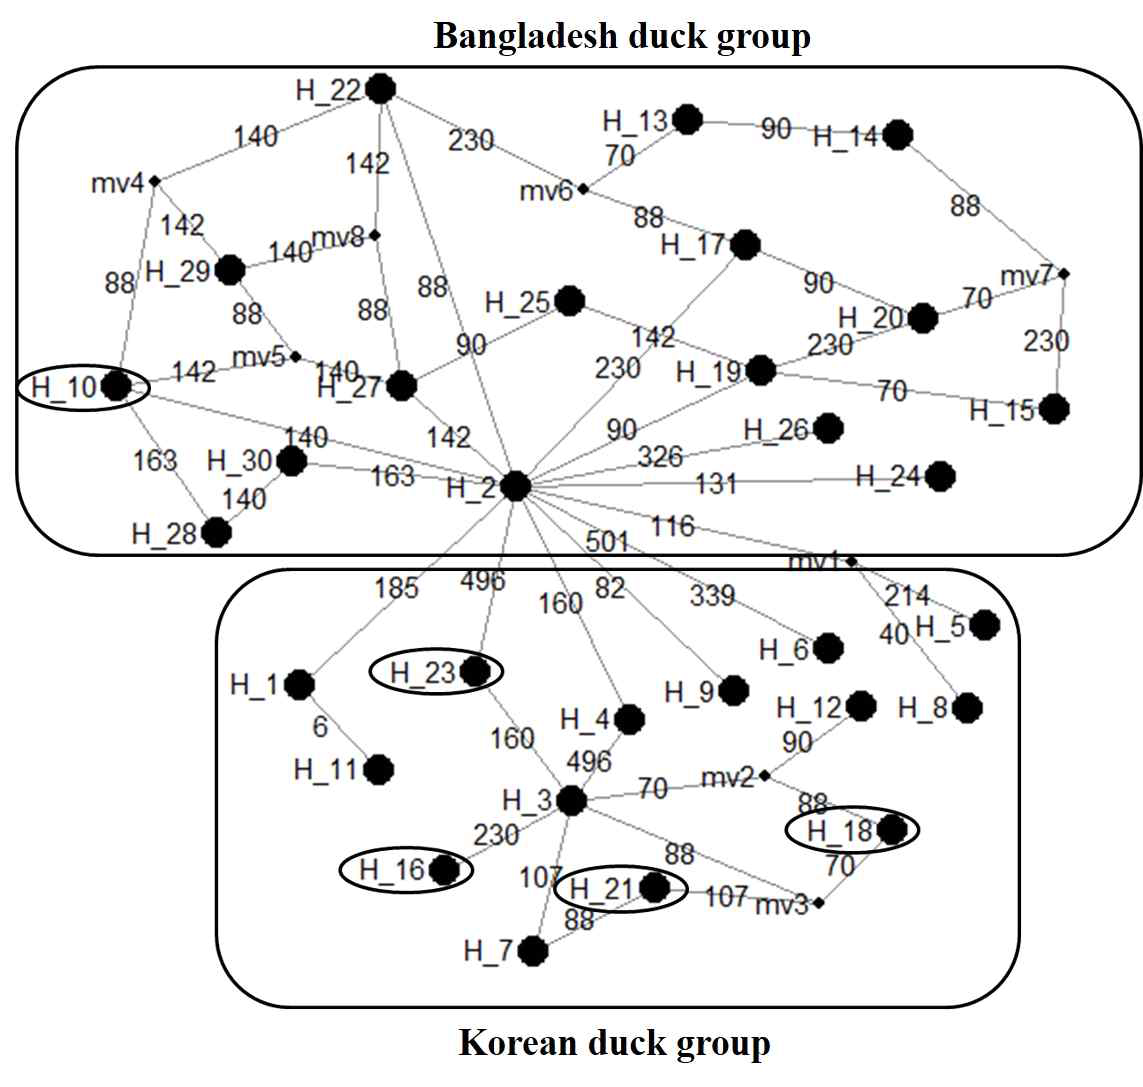 Median-joining network profiles of D-loop regions among the duck breeds.